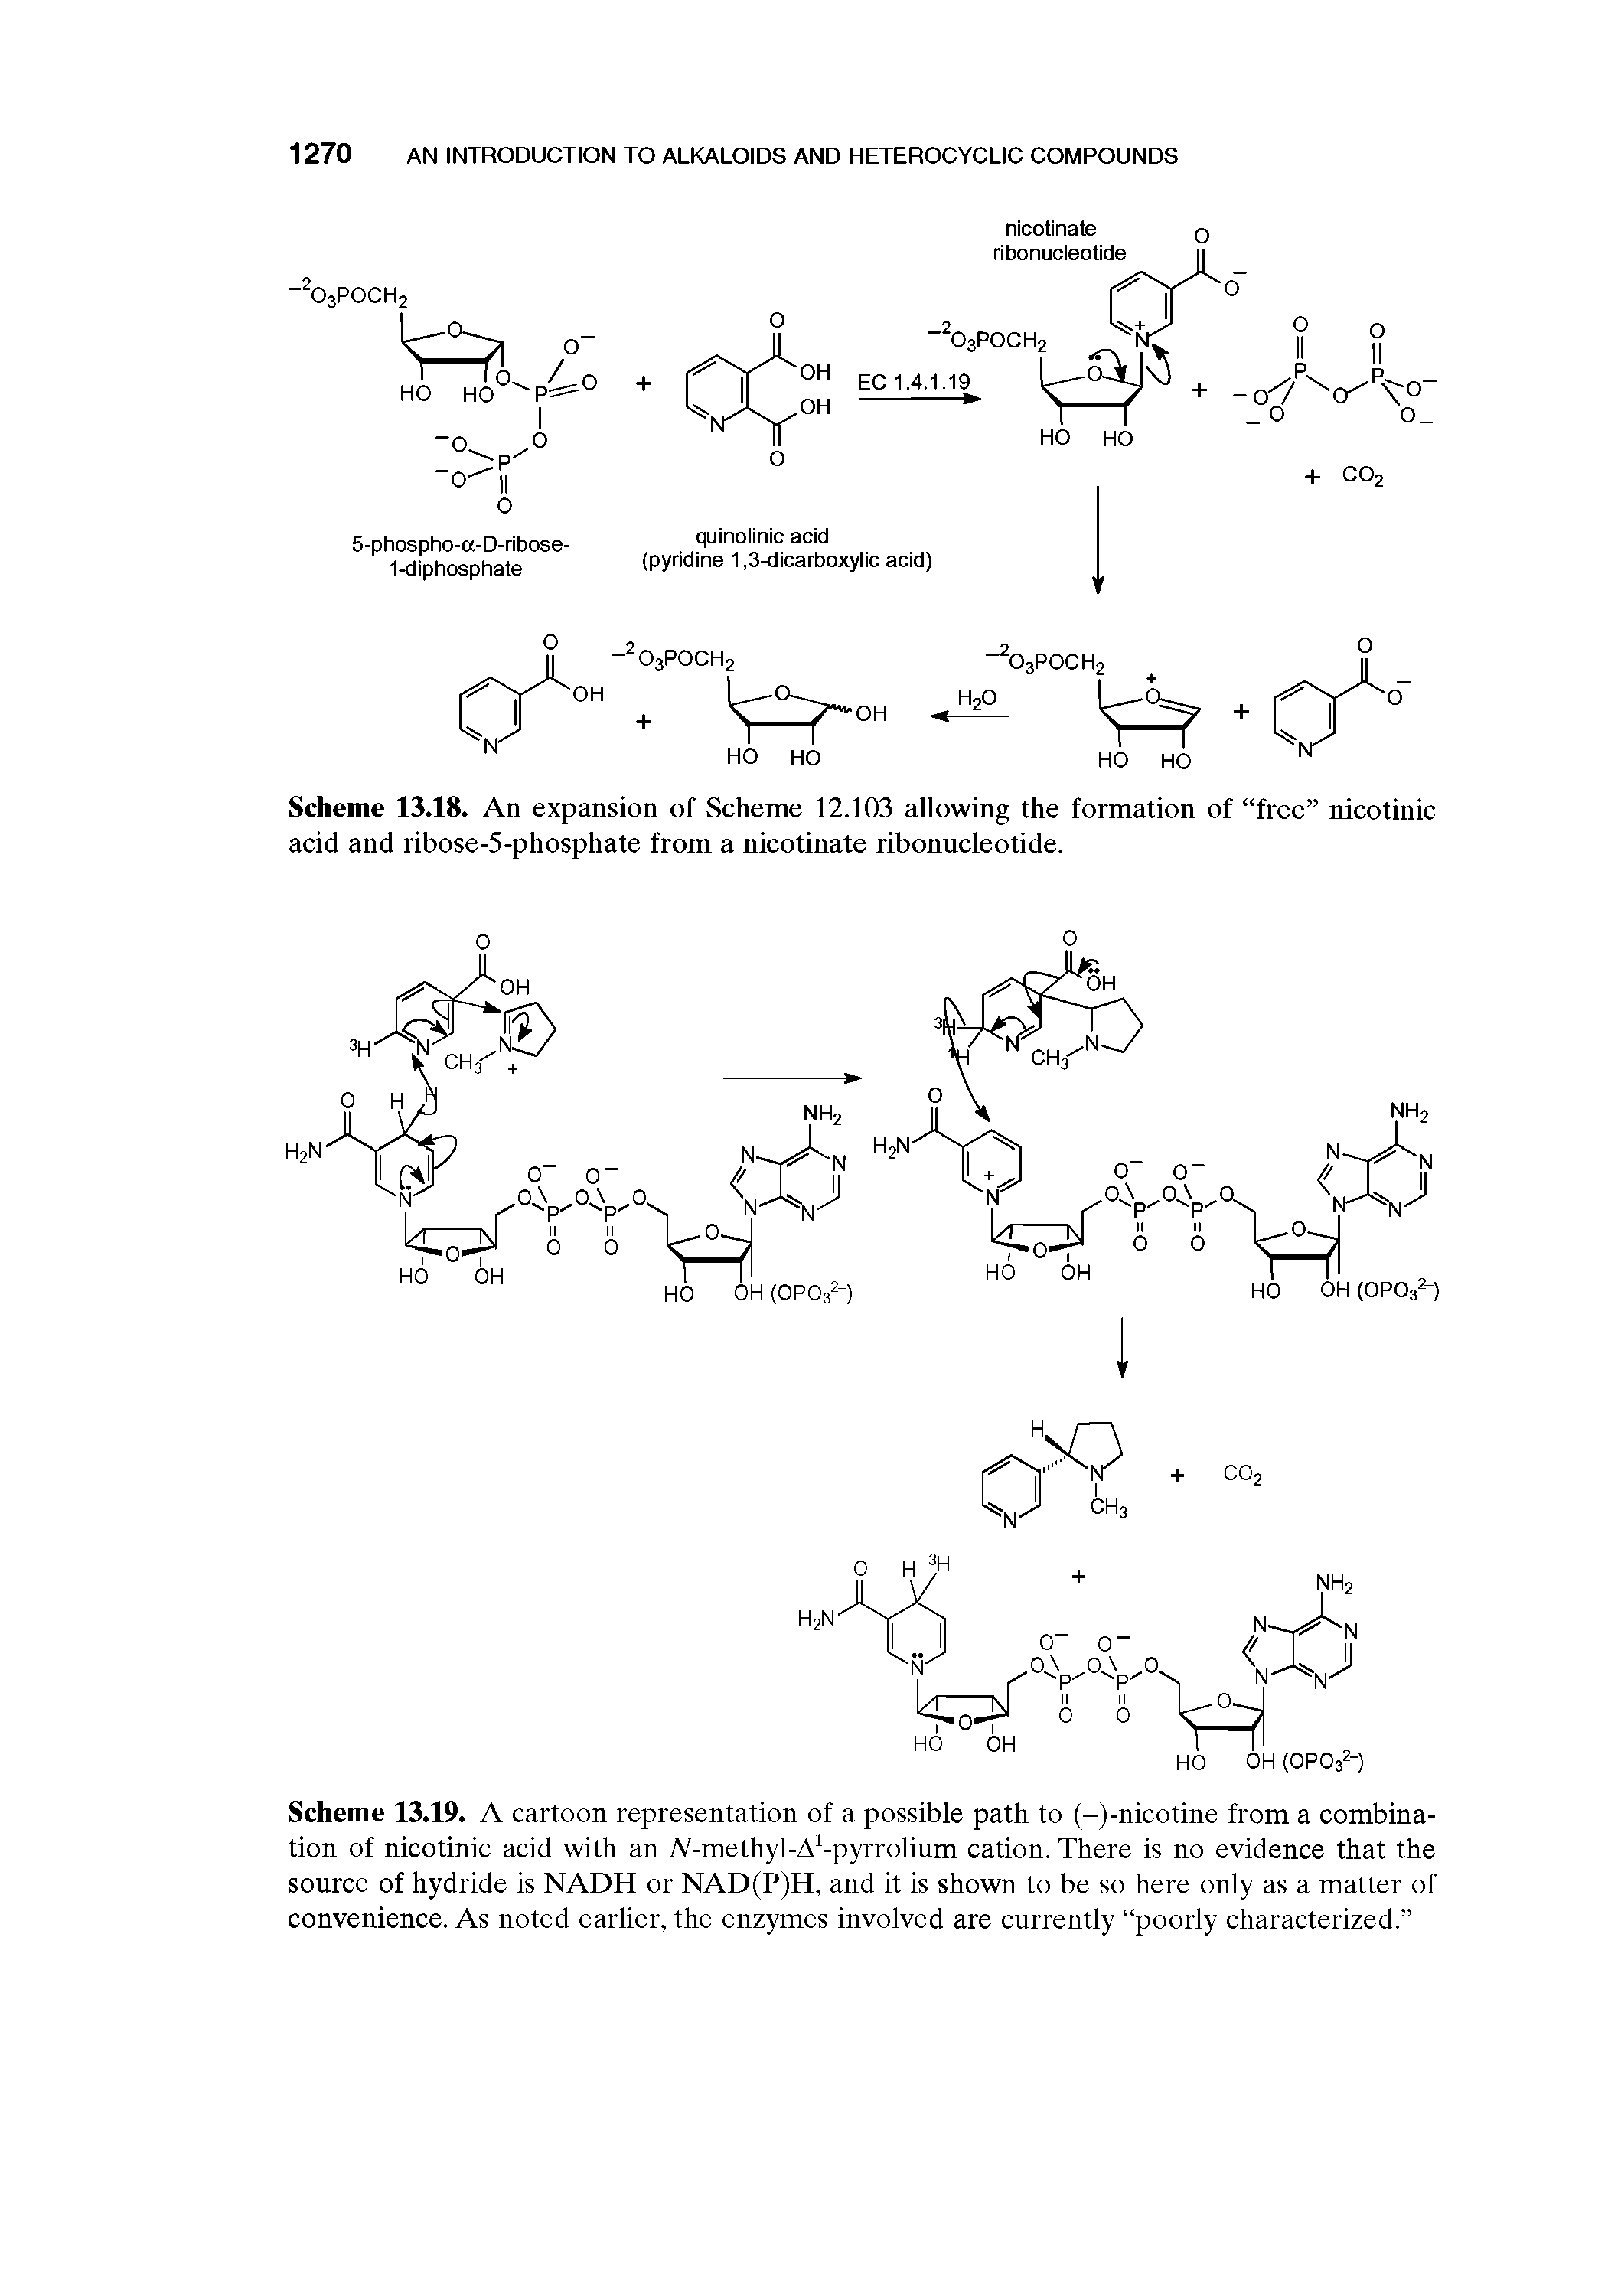 Scheme 13.19 A cartoon representation of a possible path to (-)-nicotine from a combina-tion of nicotinic acid with an A-methyl-A -pyrrolium cation. There is no evidence that the source of hydride is NADH or NAD(P)H, and it is shown to be so here only as a matter of convenience. As noted earlier, the enzymes involved are currently poorly characterized. ...